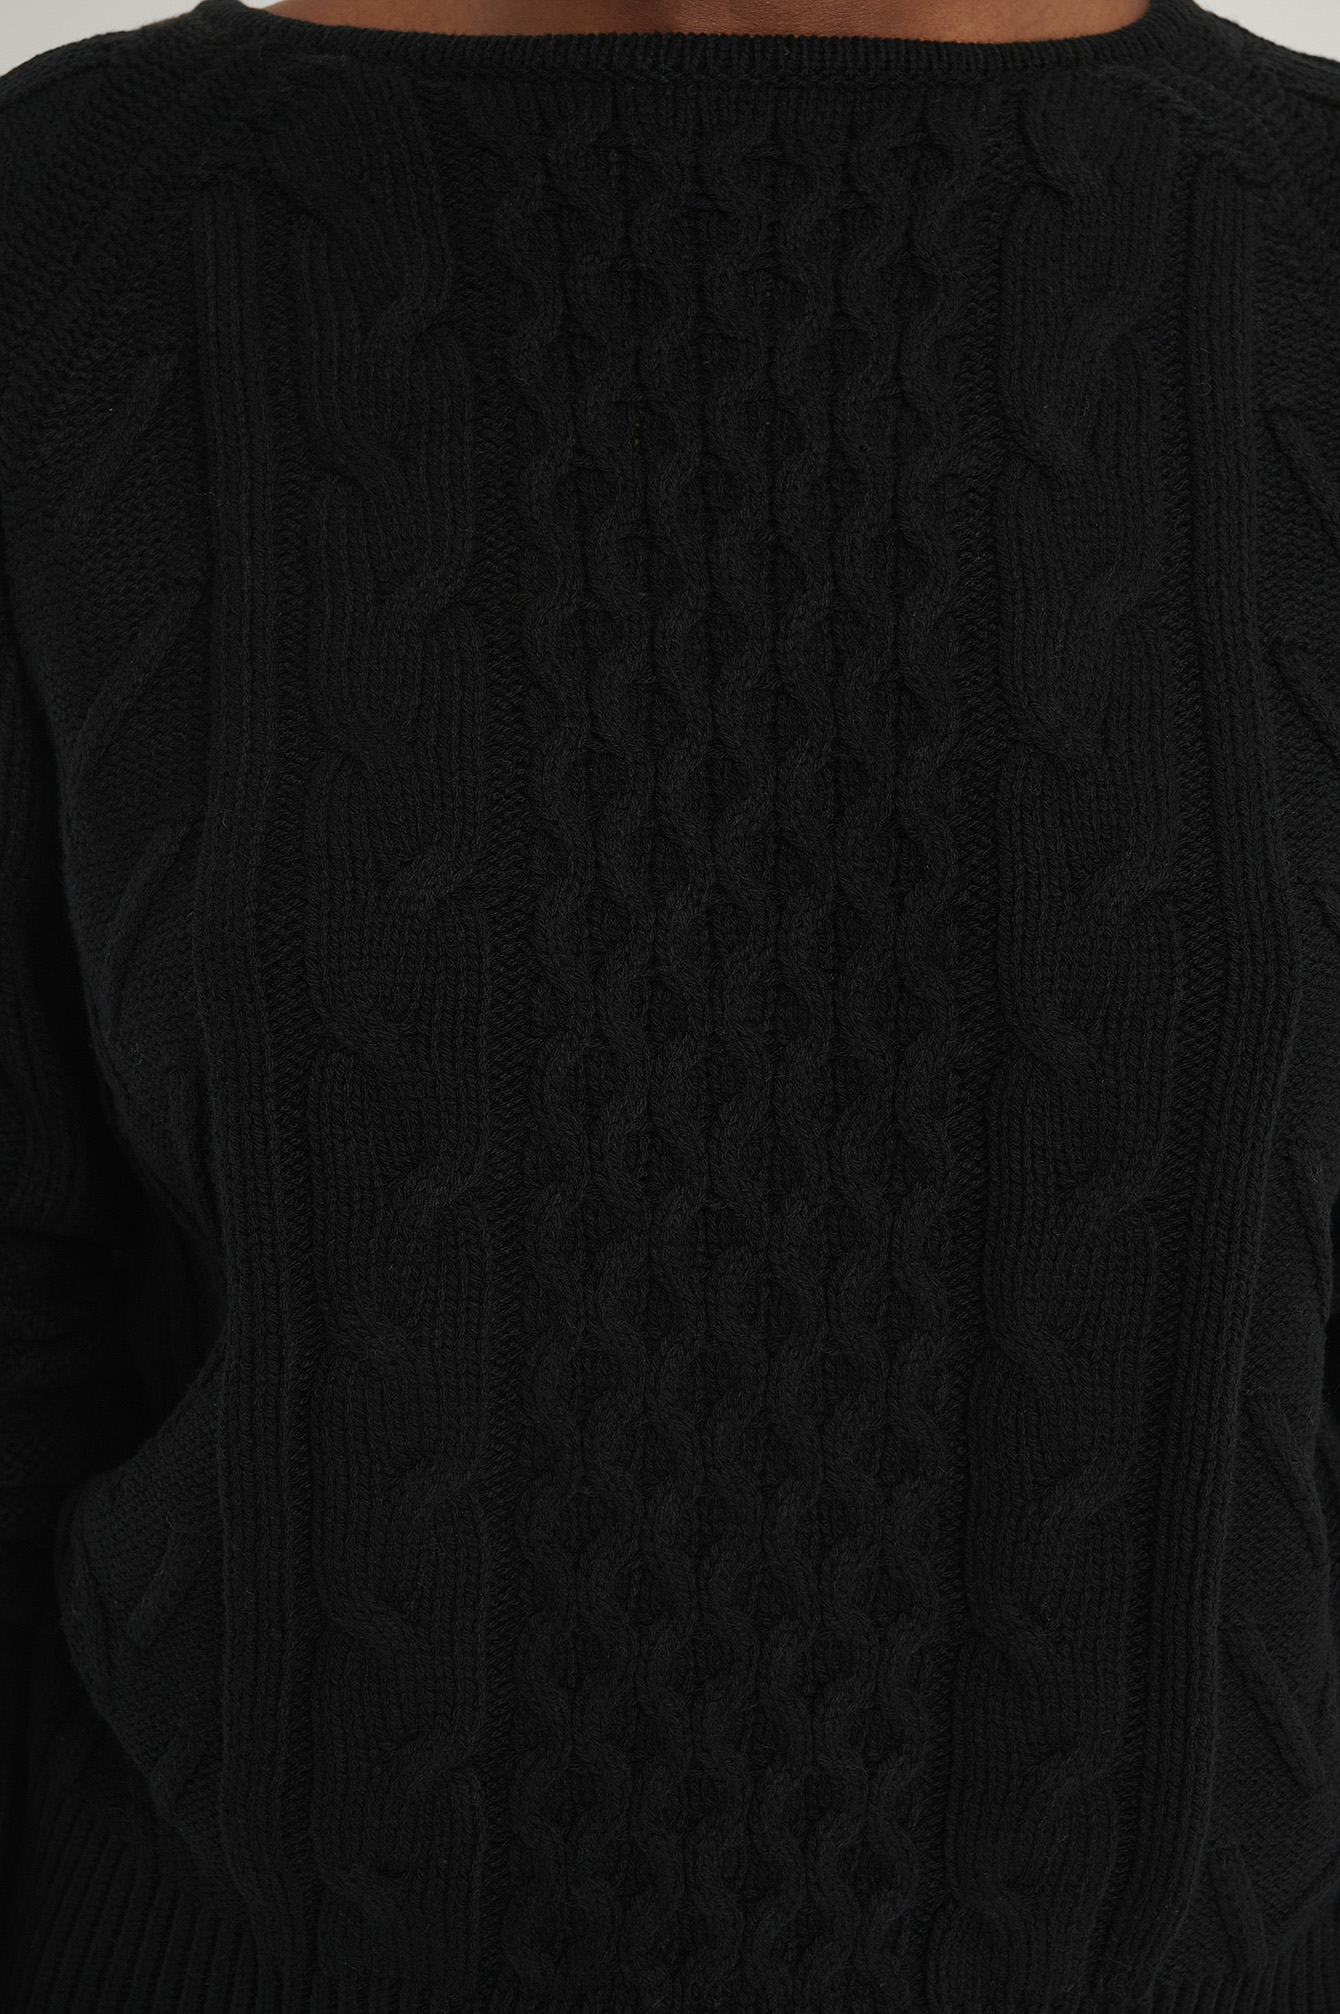 Black Back Overlap Cable Knitted Sweater